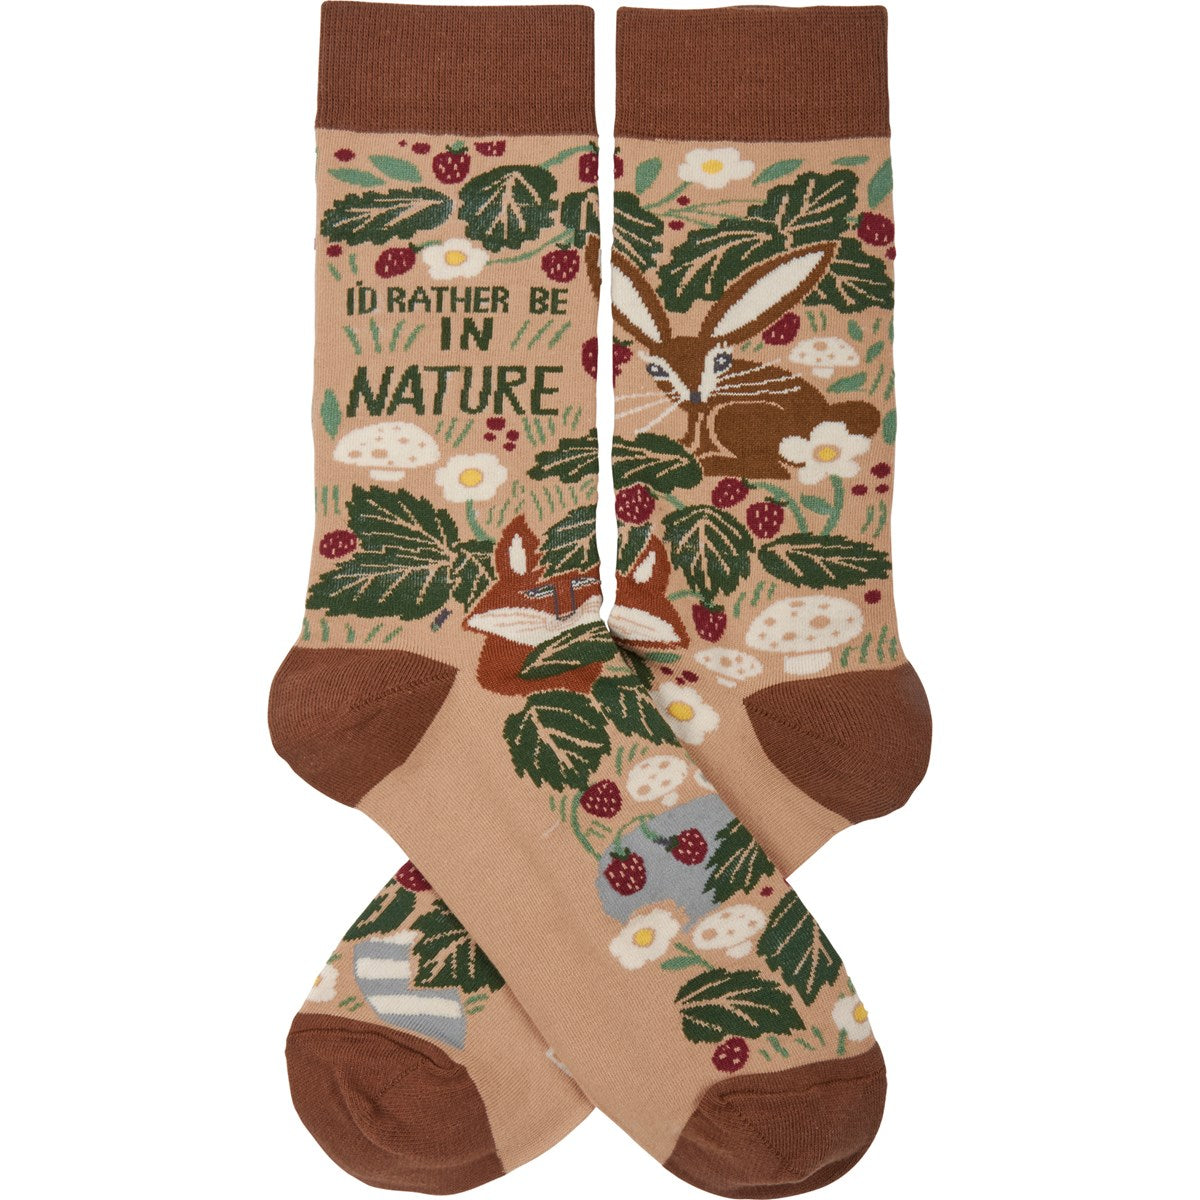 I'd Rather Be In Nature Socks